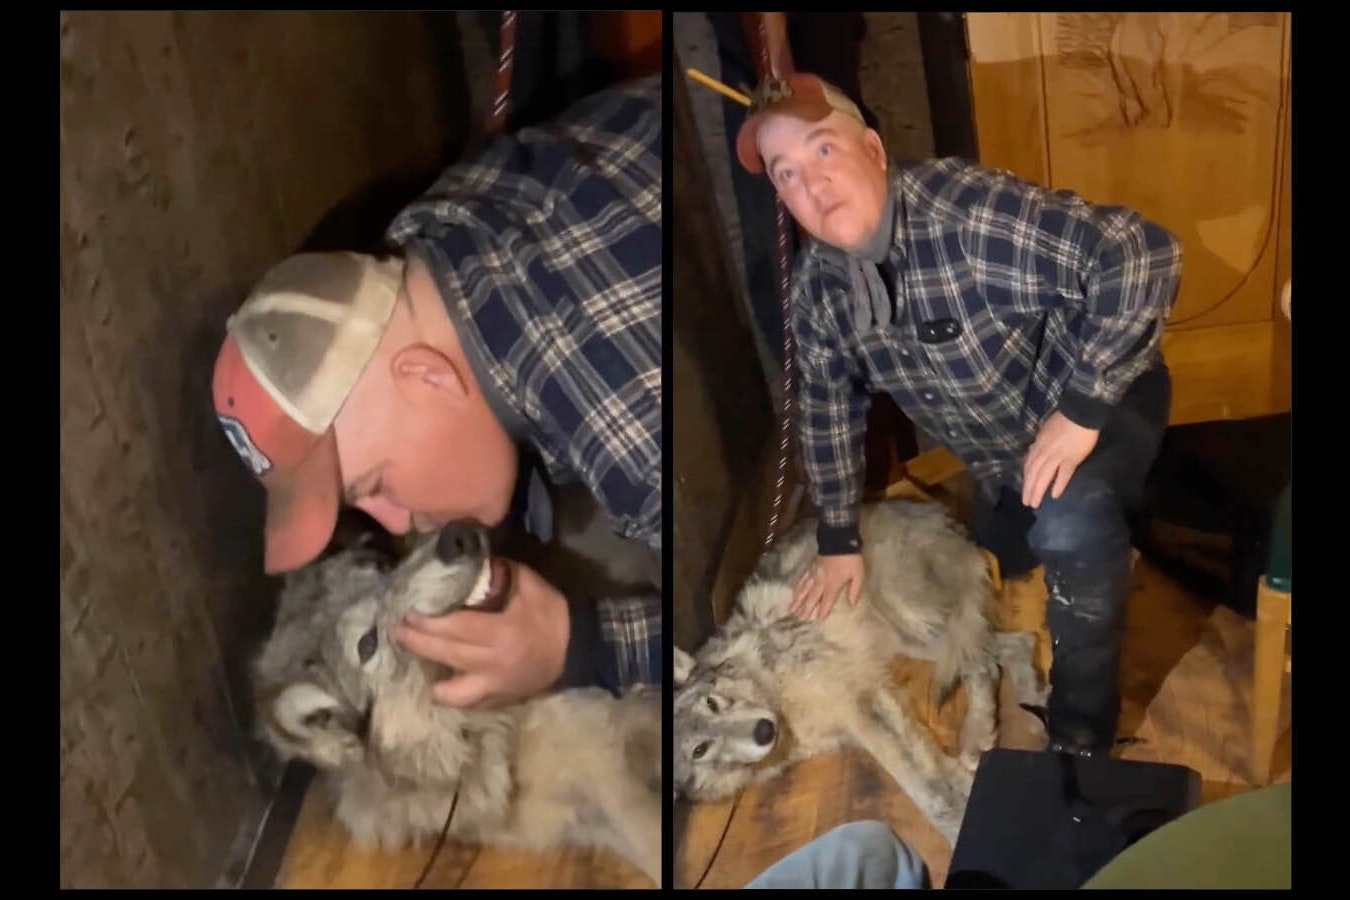 Screenshots from a video clip provided exclusively to Cowboy State Daily show Daniel, Wyoming, resident Cody Roberts kneeling over and kissing the muzzle of a weak and injured wolf in the Green River Bar in Daniel on Feb. 29. No reproduction without permission.